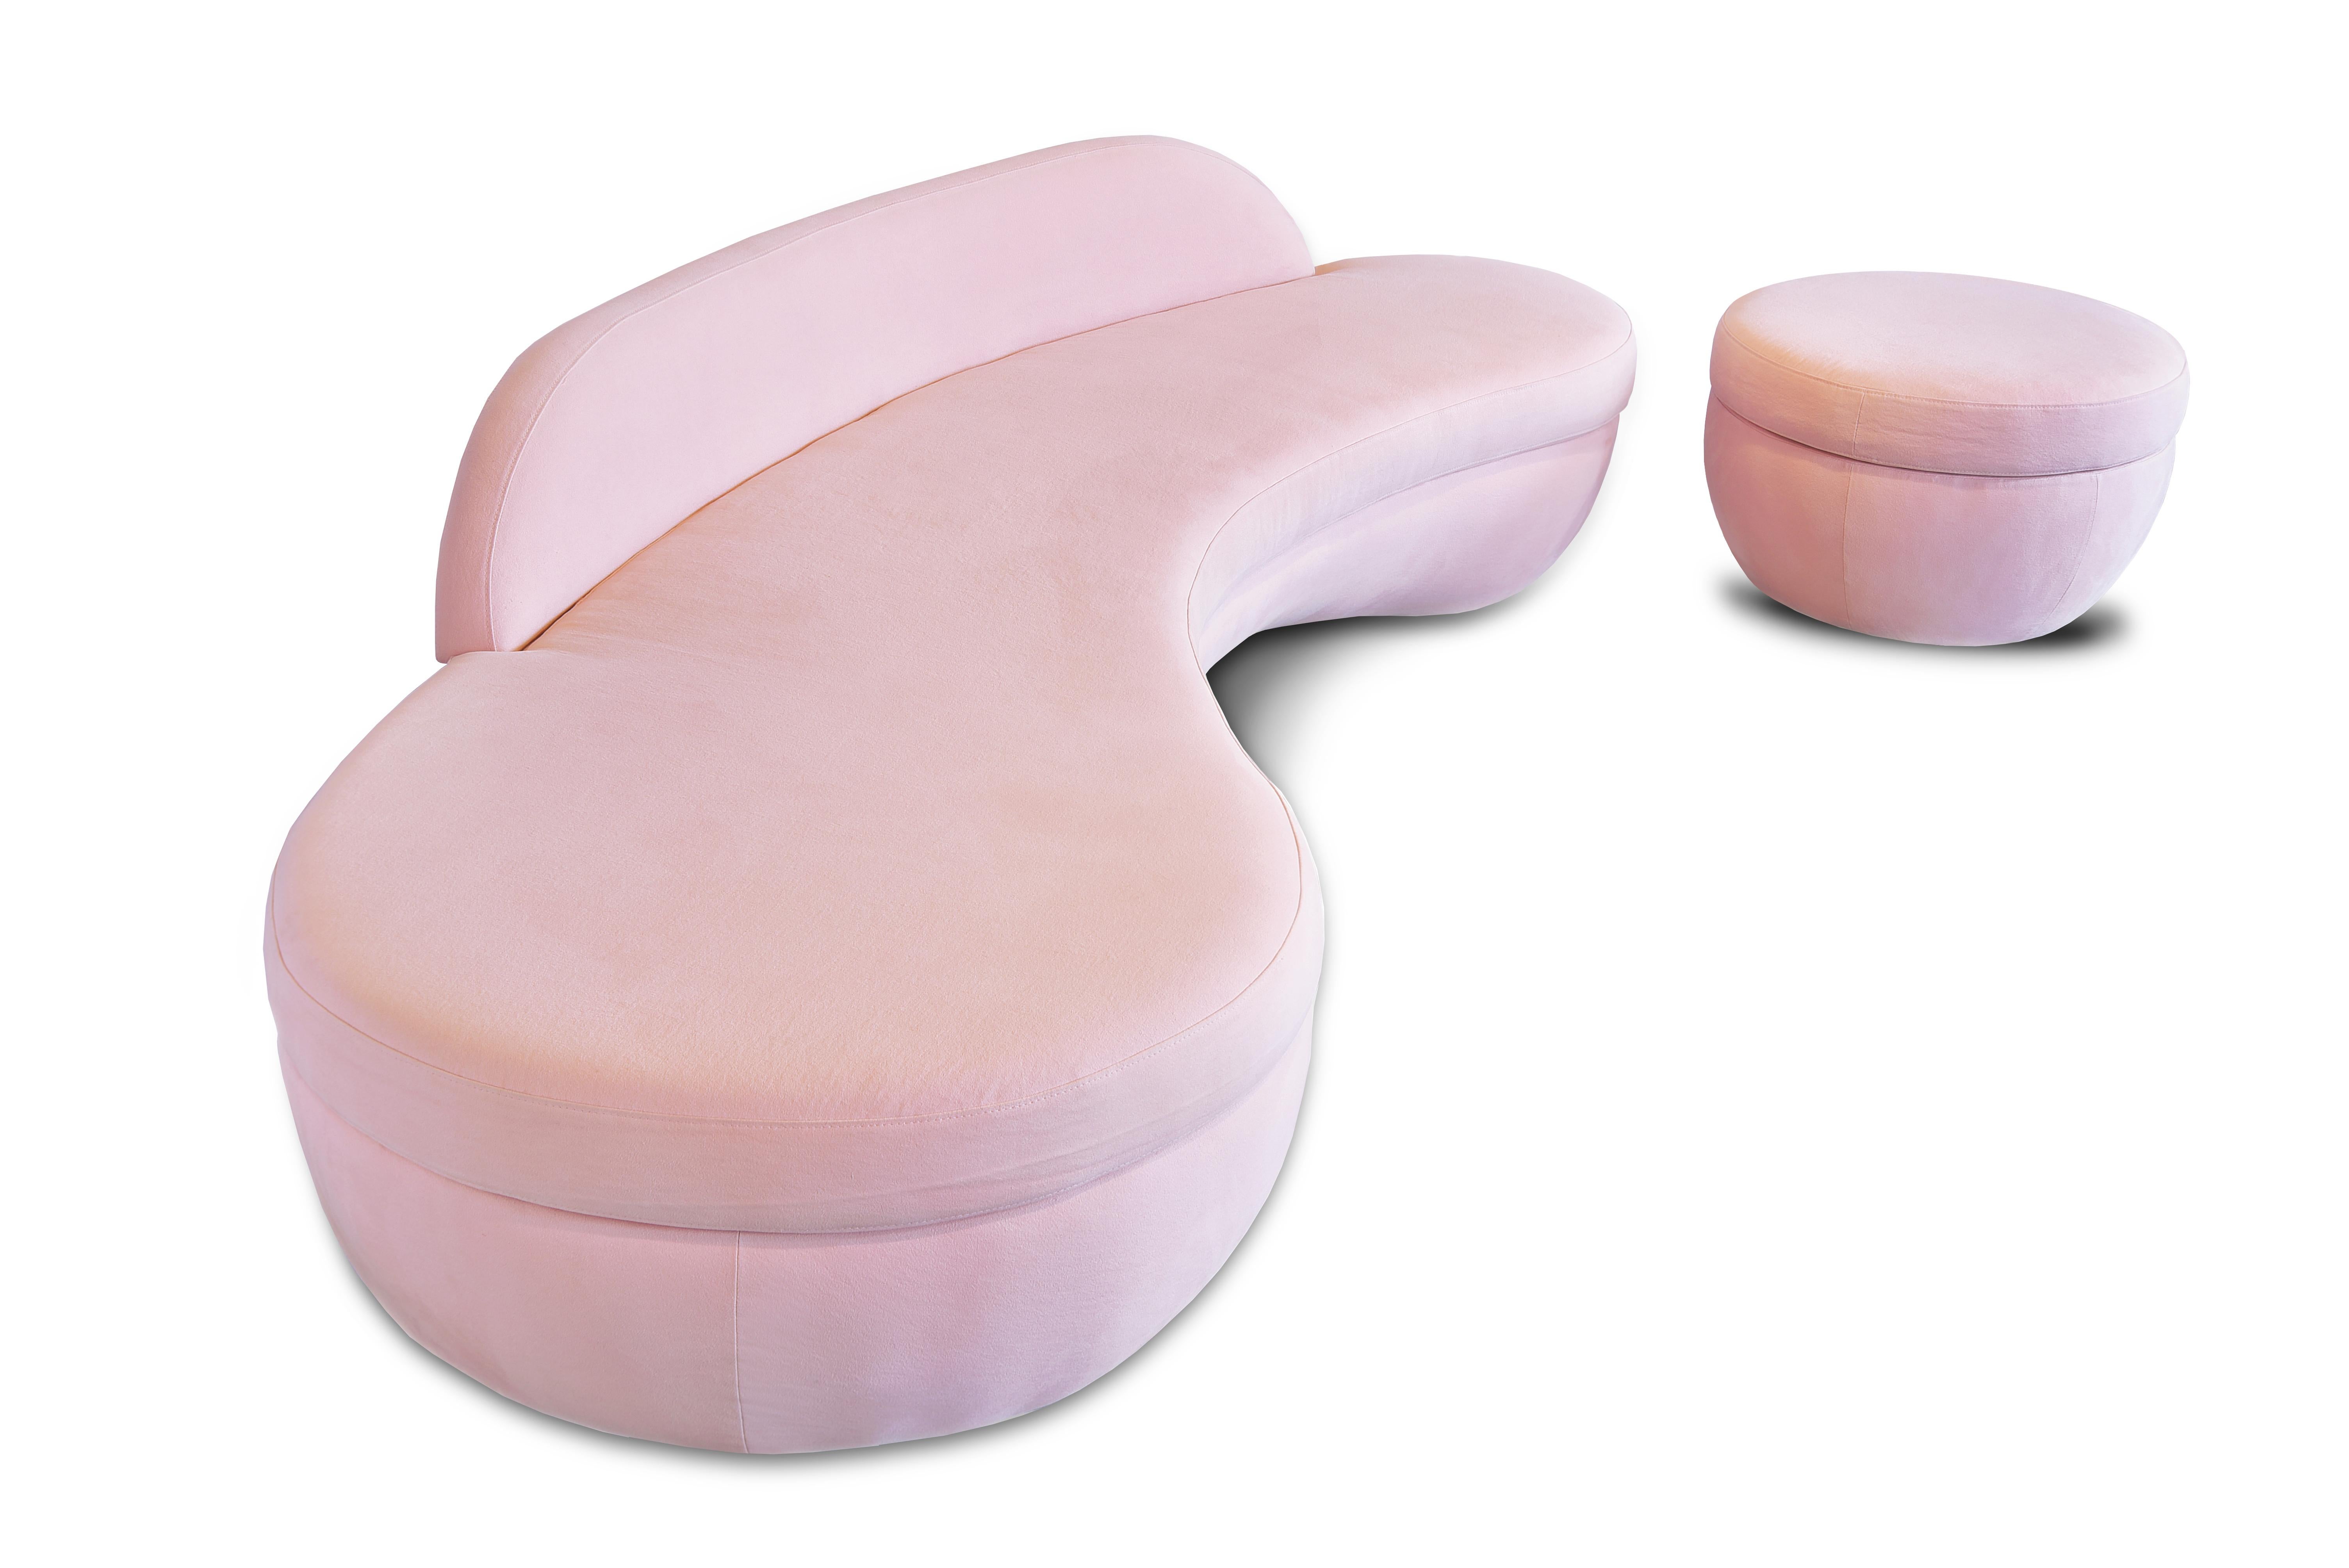 Sense sofa, by Tiago Curioni has a bean design, but it differs from the other models because it has a free span in the center that defies the limitations of the design as much as possible. Developed after numerous stability tests, it is done